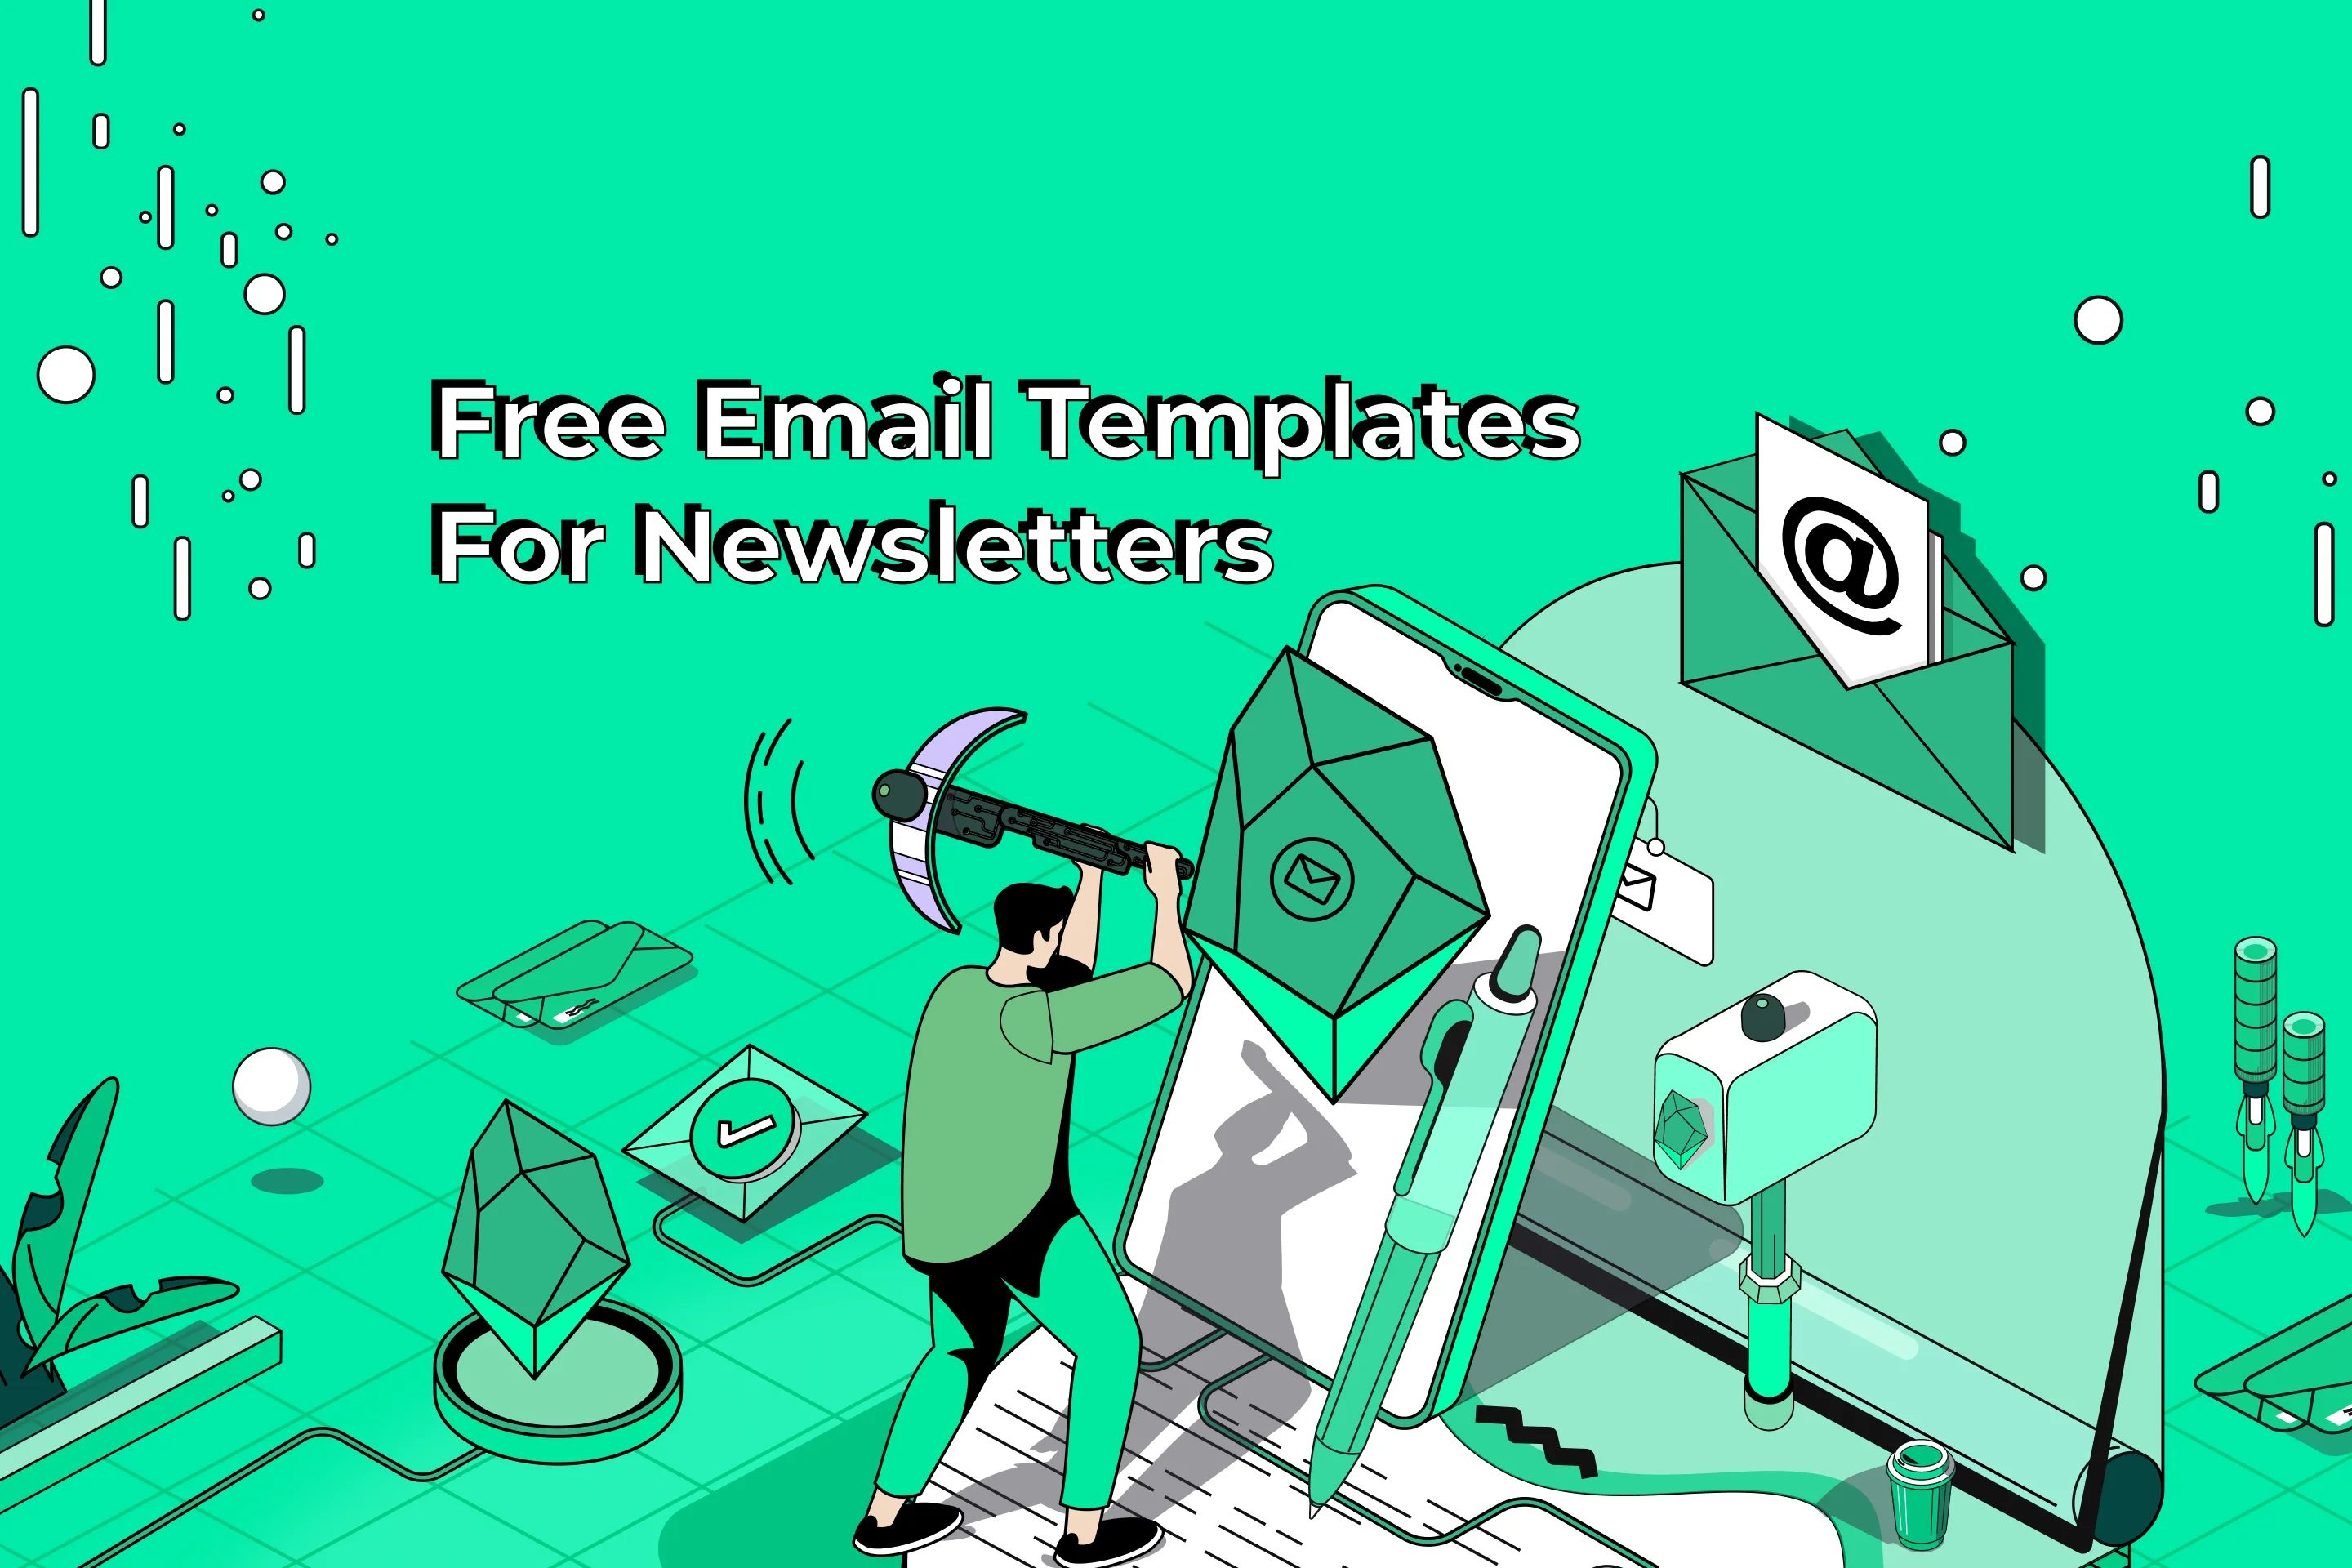 Free Email Templates For Newsletters